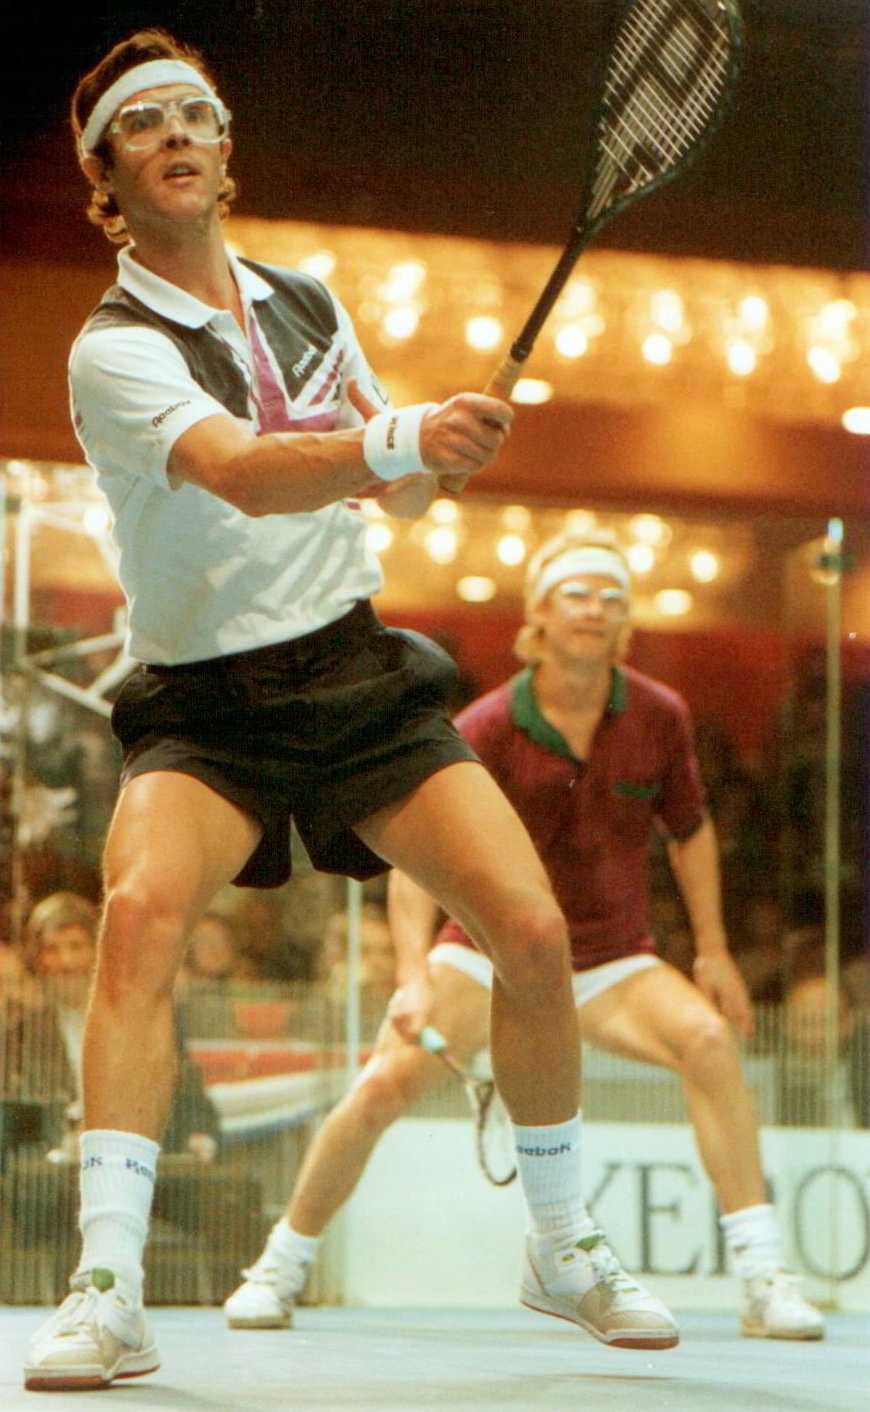 For more than a decade, Talbott pushed back attempts by such players as Gary Waite (above) and Kenton Jernigan (below right) to dethrone the top-ranked player on the WPSA tour.